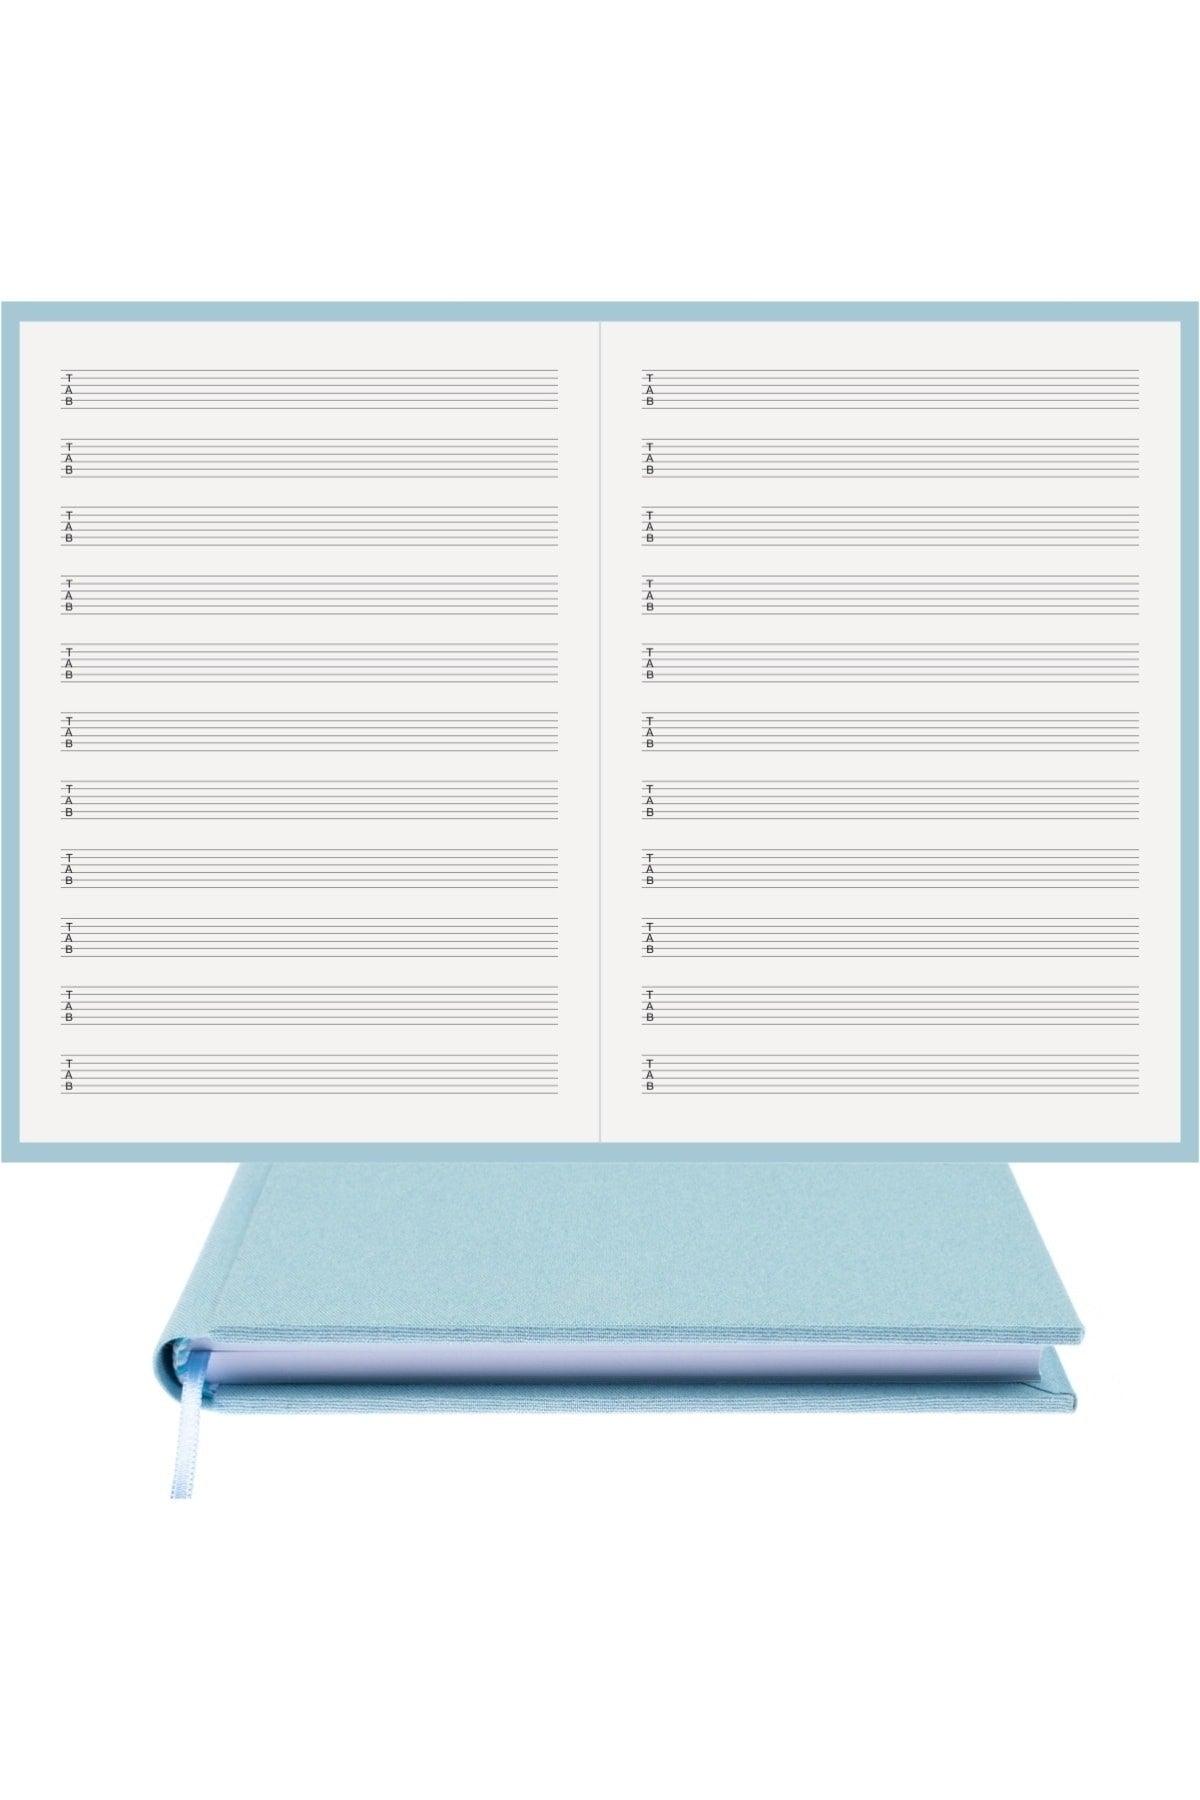 Guitar Notebook (with Tab Key) 11 Slats